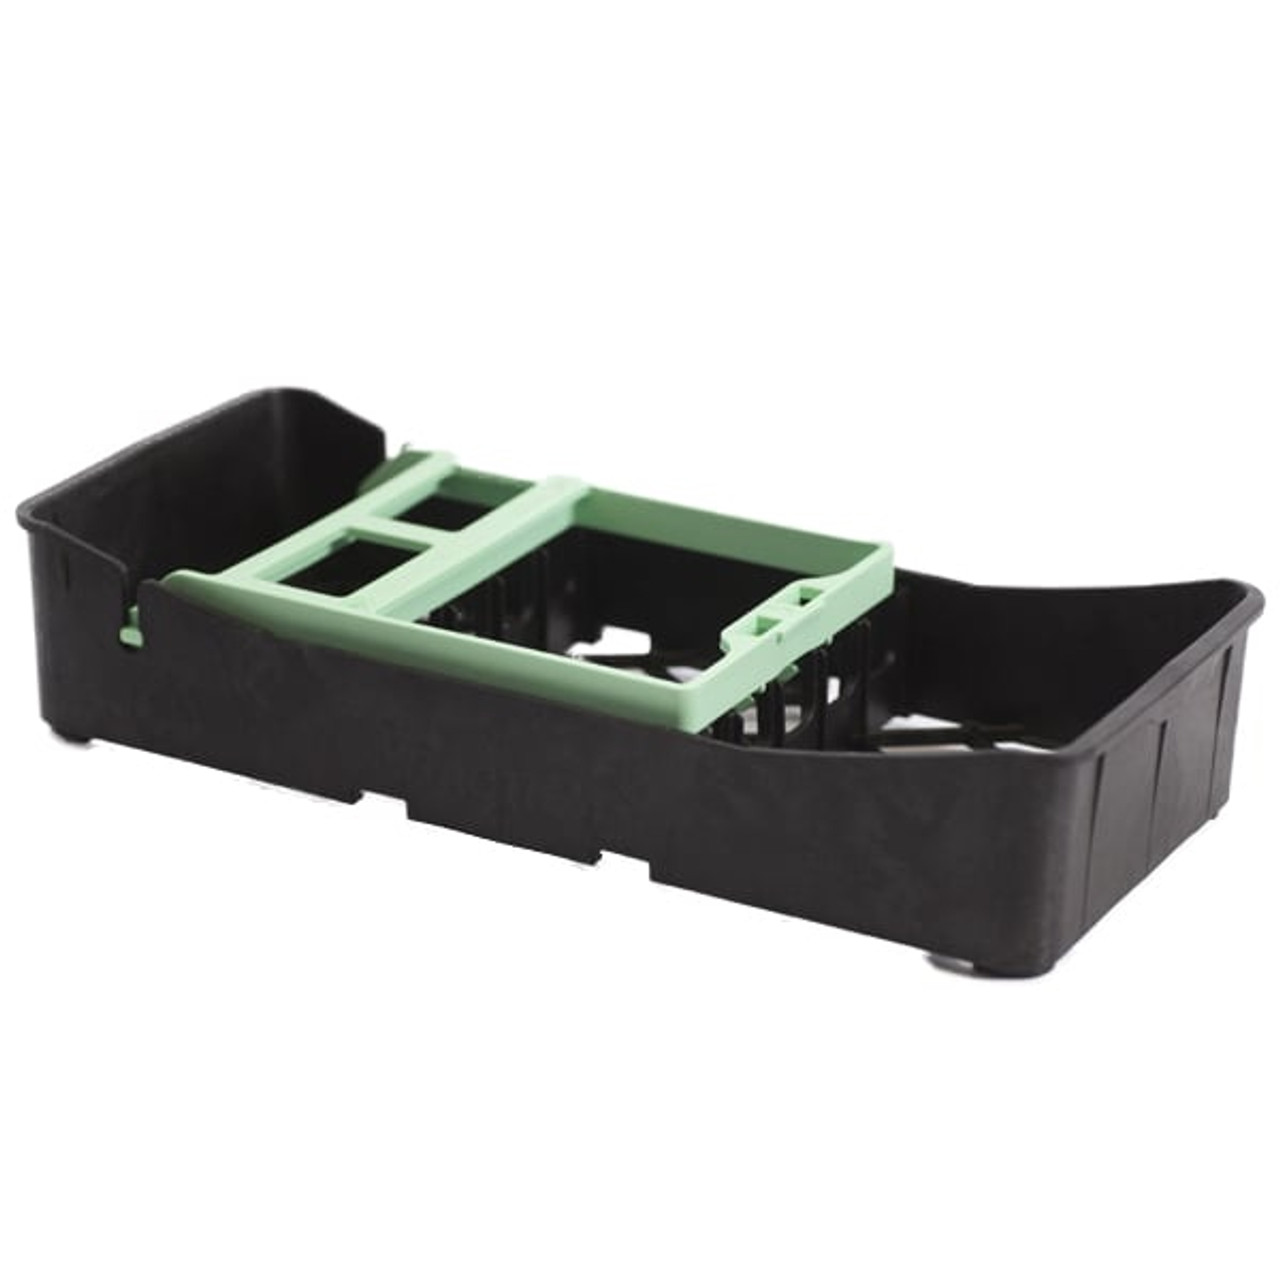 Directa PractiPal Mini Tray with Mint Green Clamp, 1 set